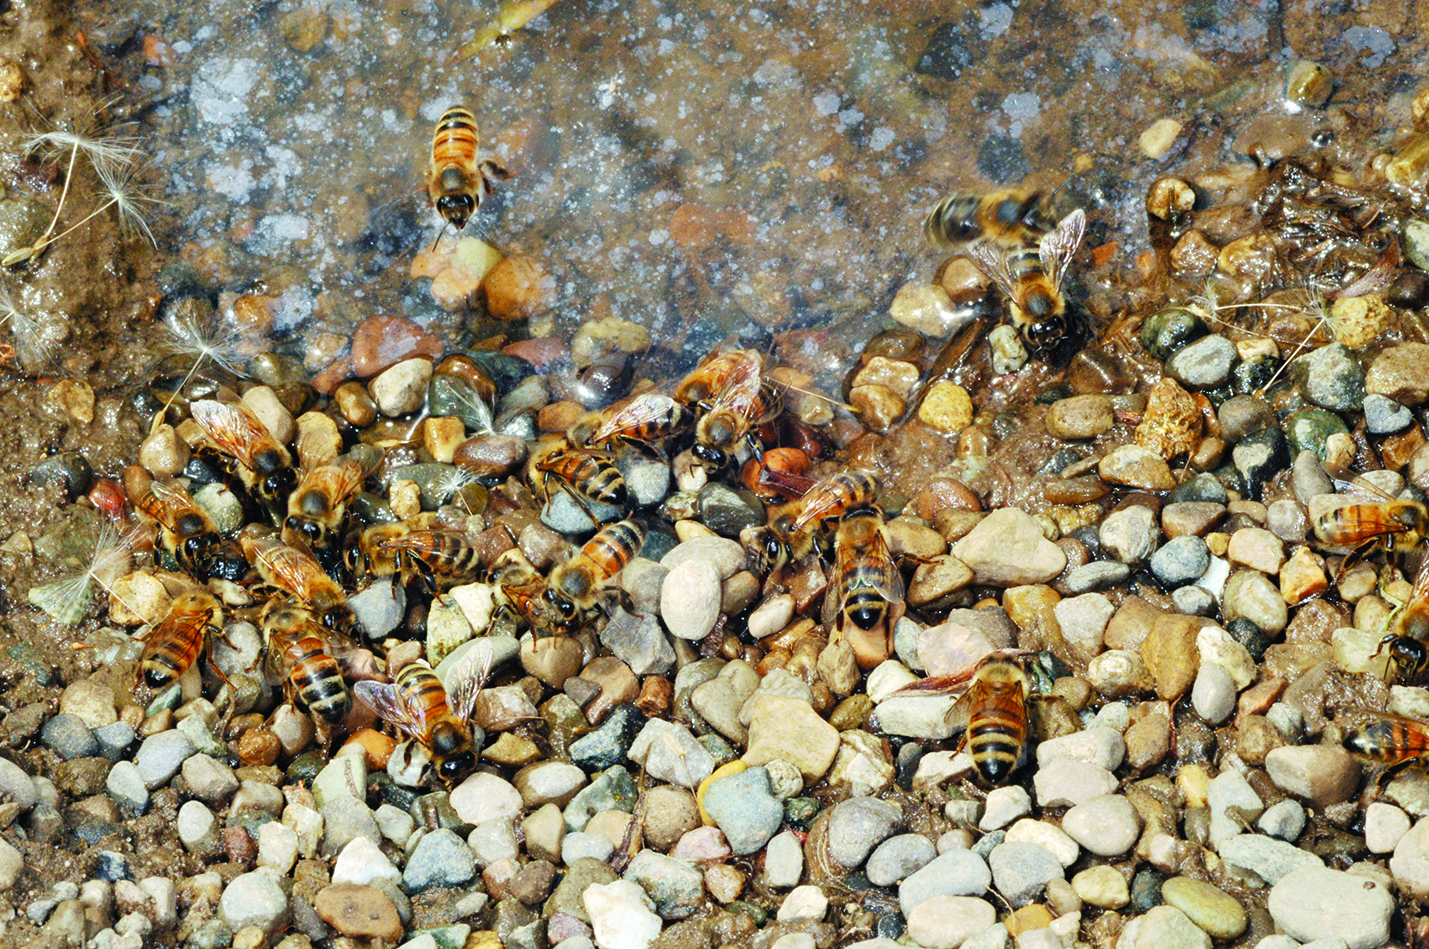 Figure 5. Honey bees drinking stagnant water next to a field.